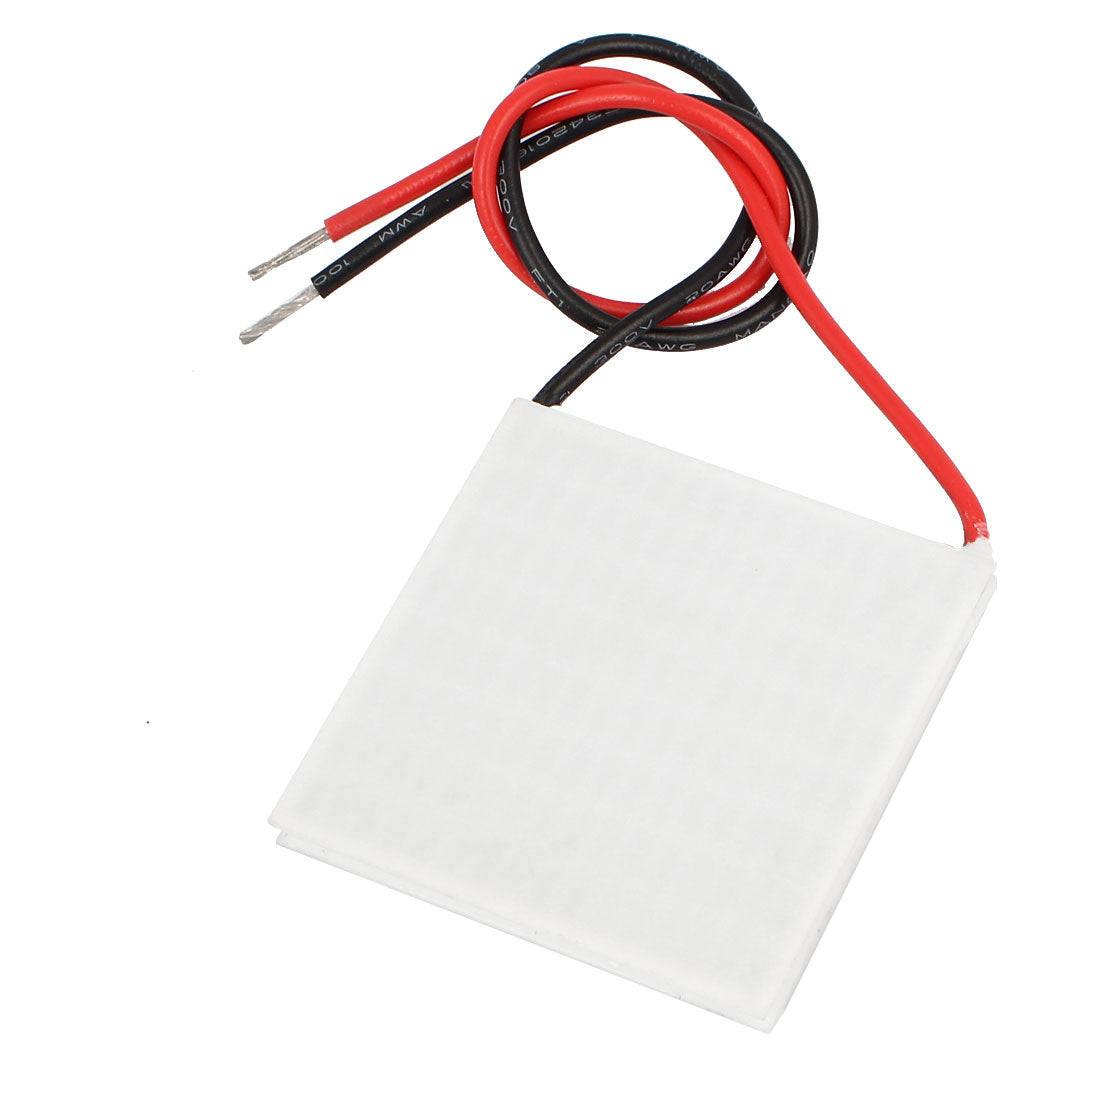 uxcell Uxcell TEC1-12707 7A 12V 60W 40x40x3.5mm Thermoelectric Cooler Peltier Plate Module